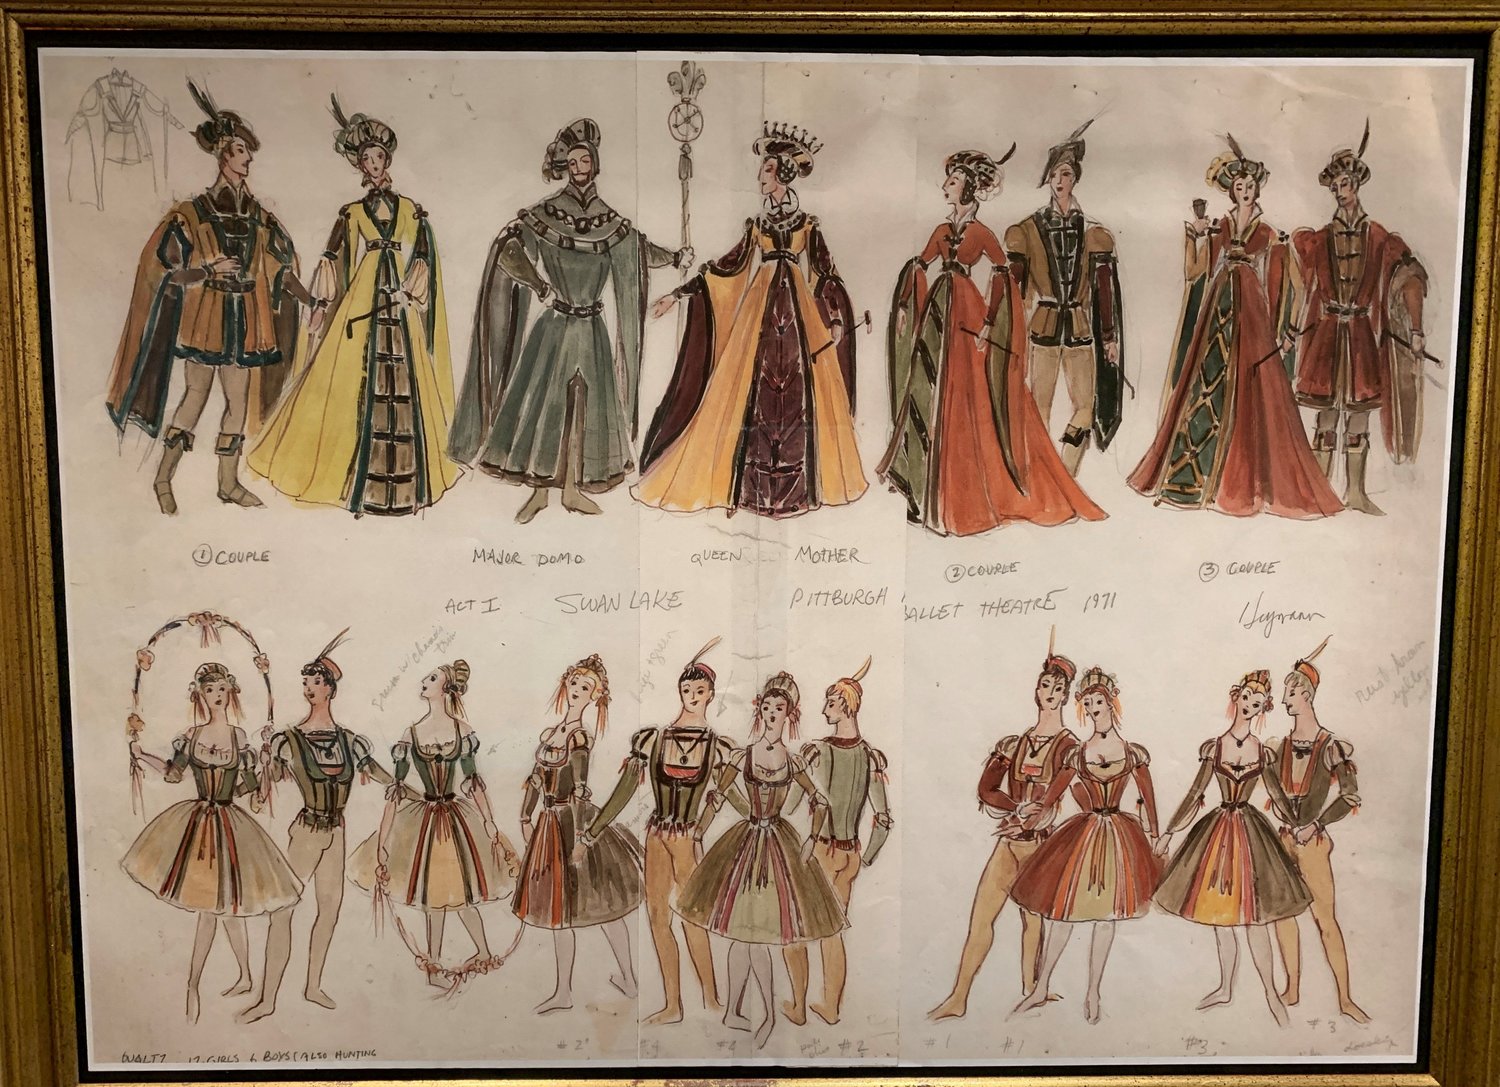 Costume designs for Christopher Marlowe’s “Doctor Faustus” by Henry Heymann.